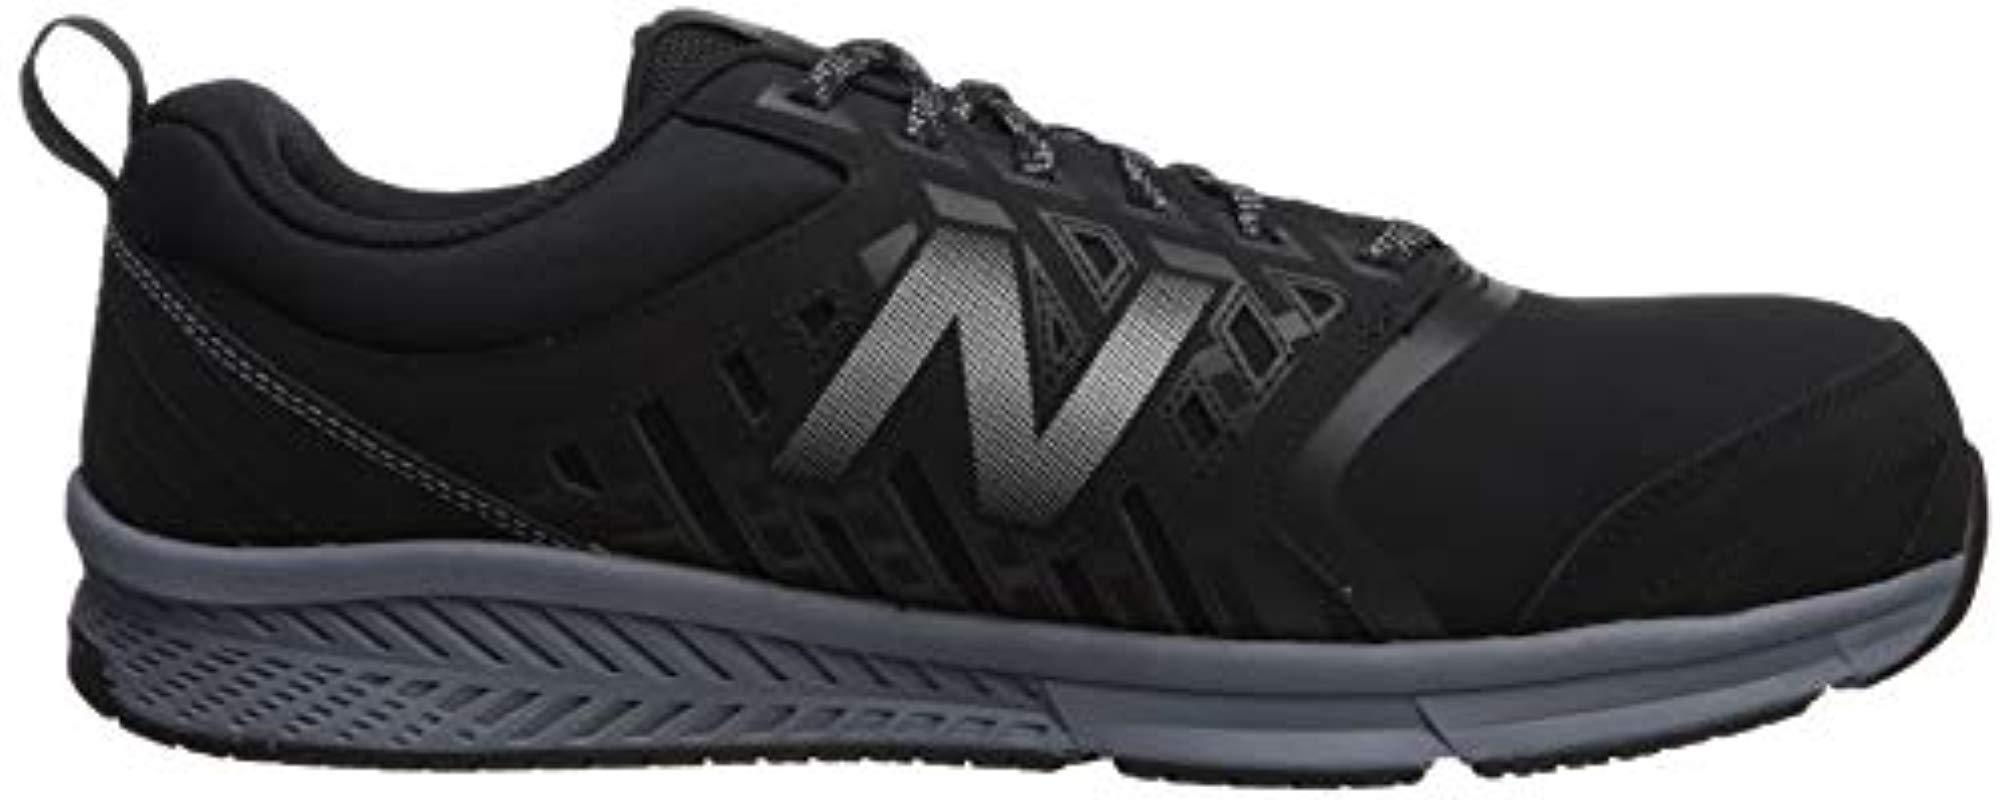 New Balance Synthetic 412v1 Work Industrial Shoe in Black/Silver (Black ...